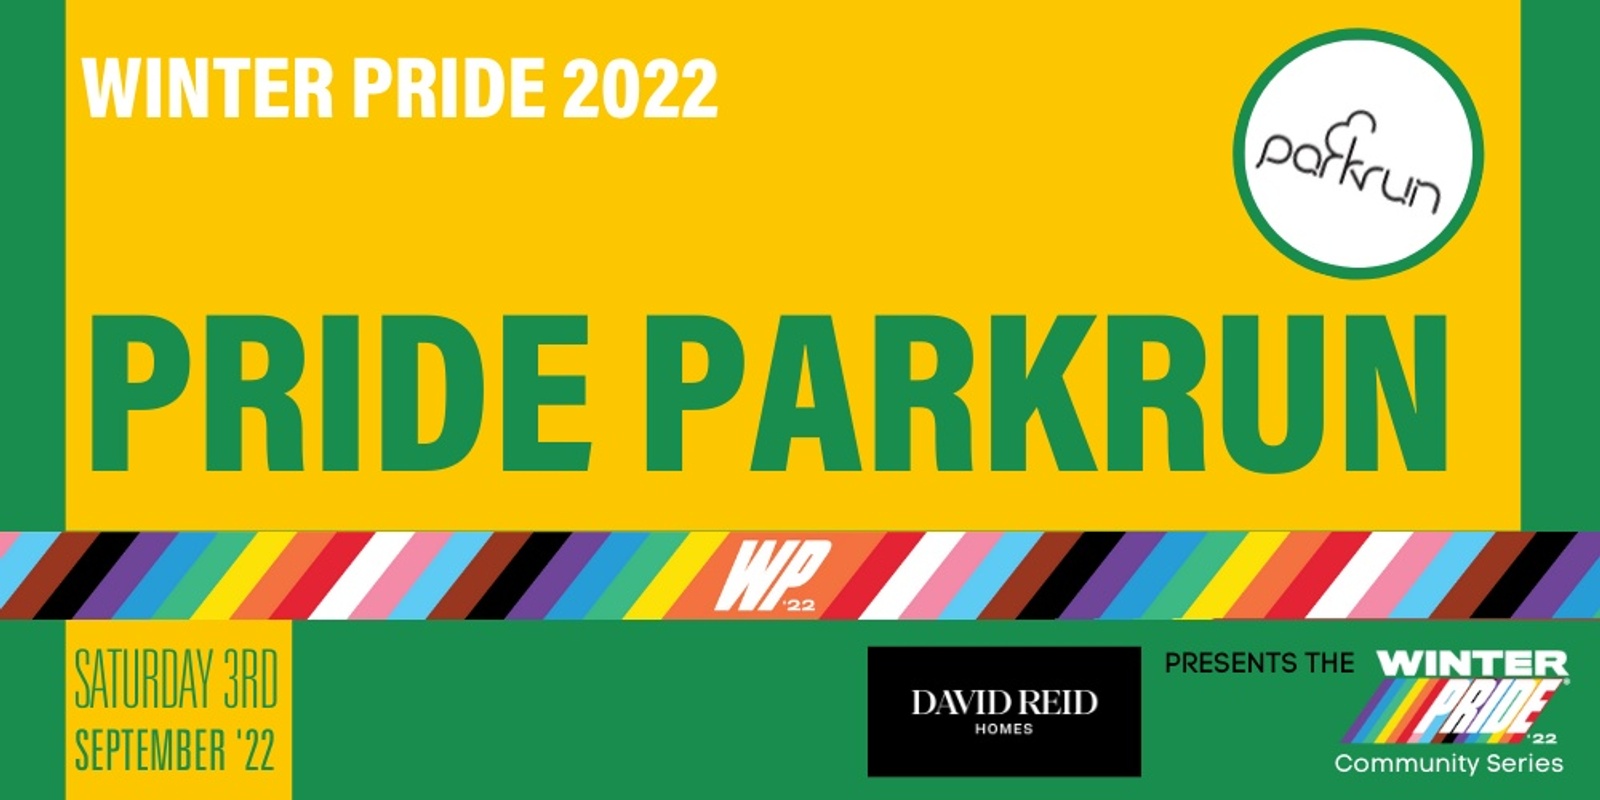 Banner image for Pride parkrun WP '22